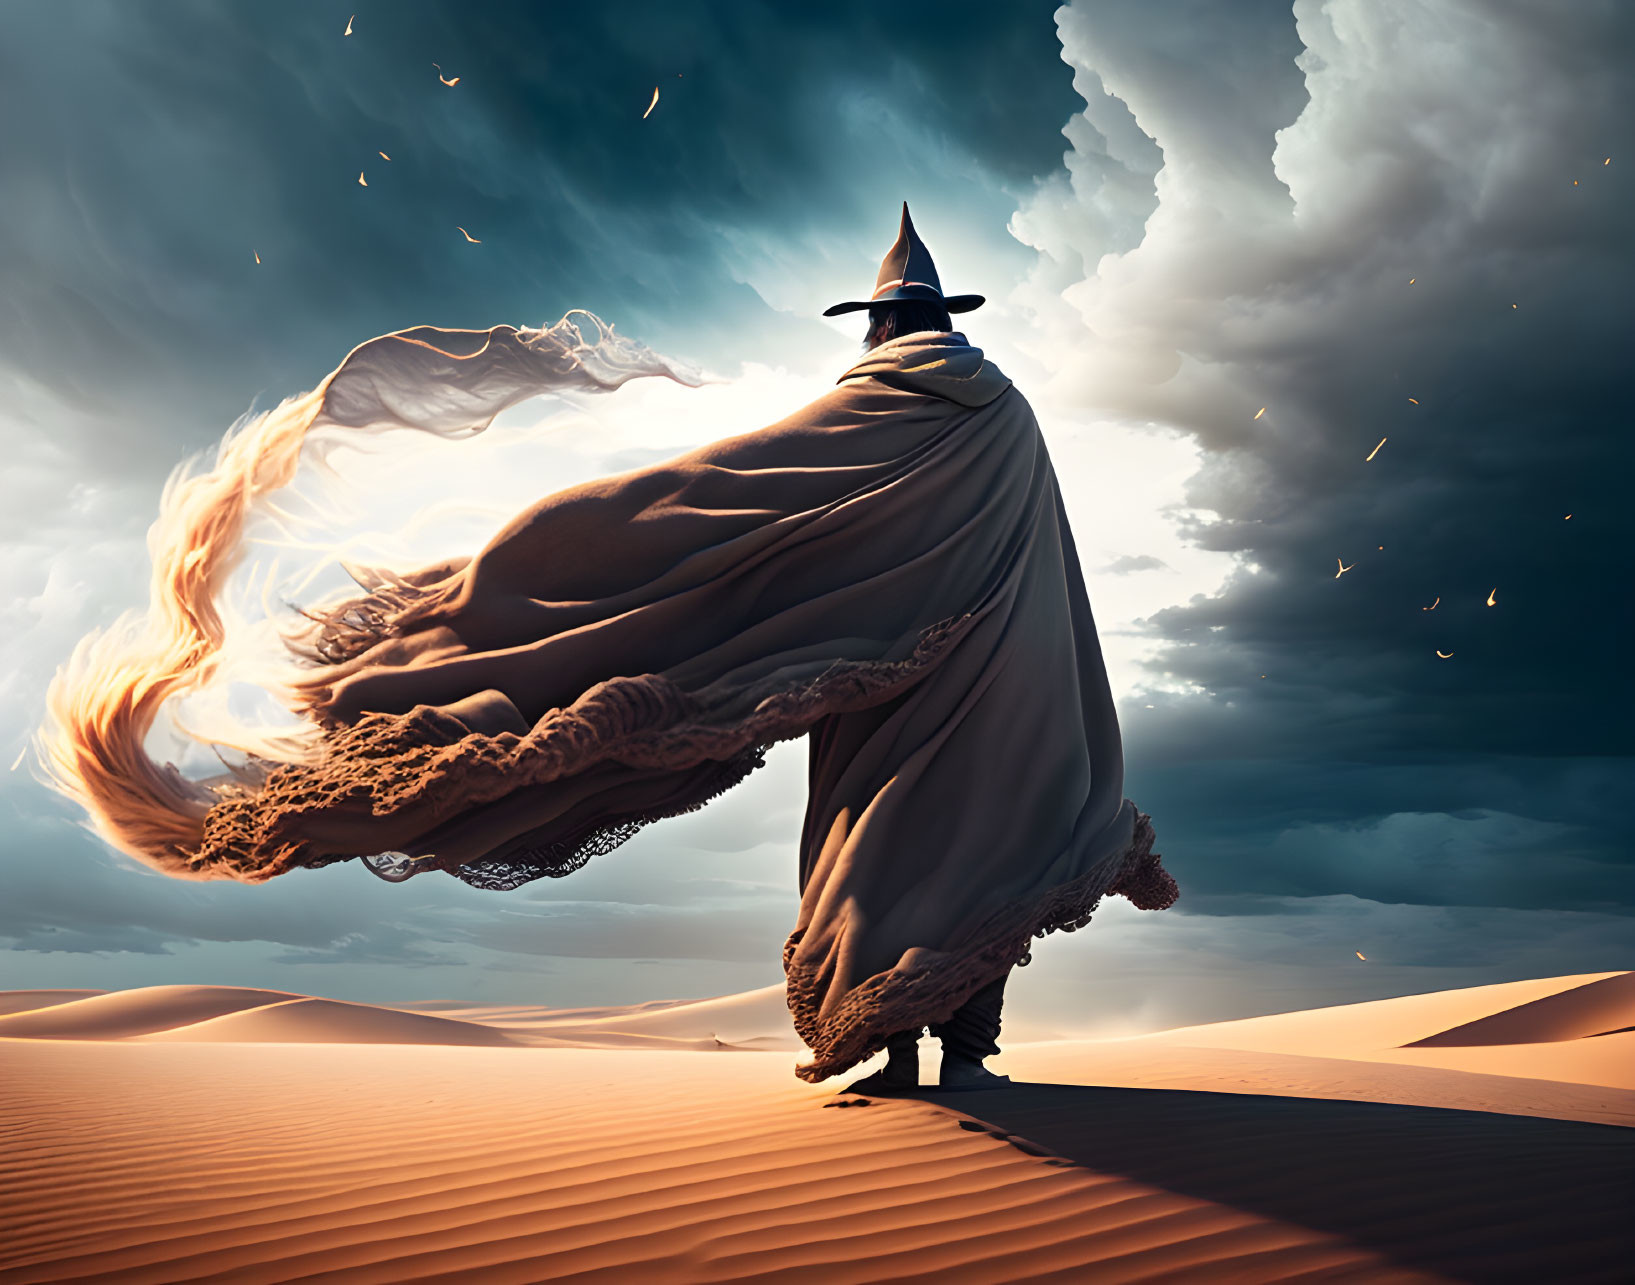 Mysterious figure in hat and cloak on desert dune under dramatic sky